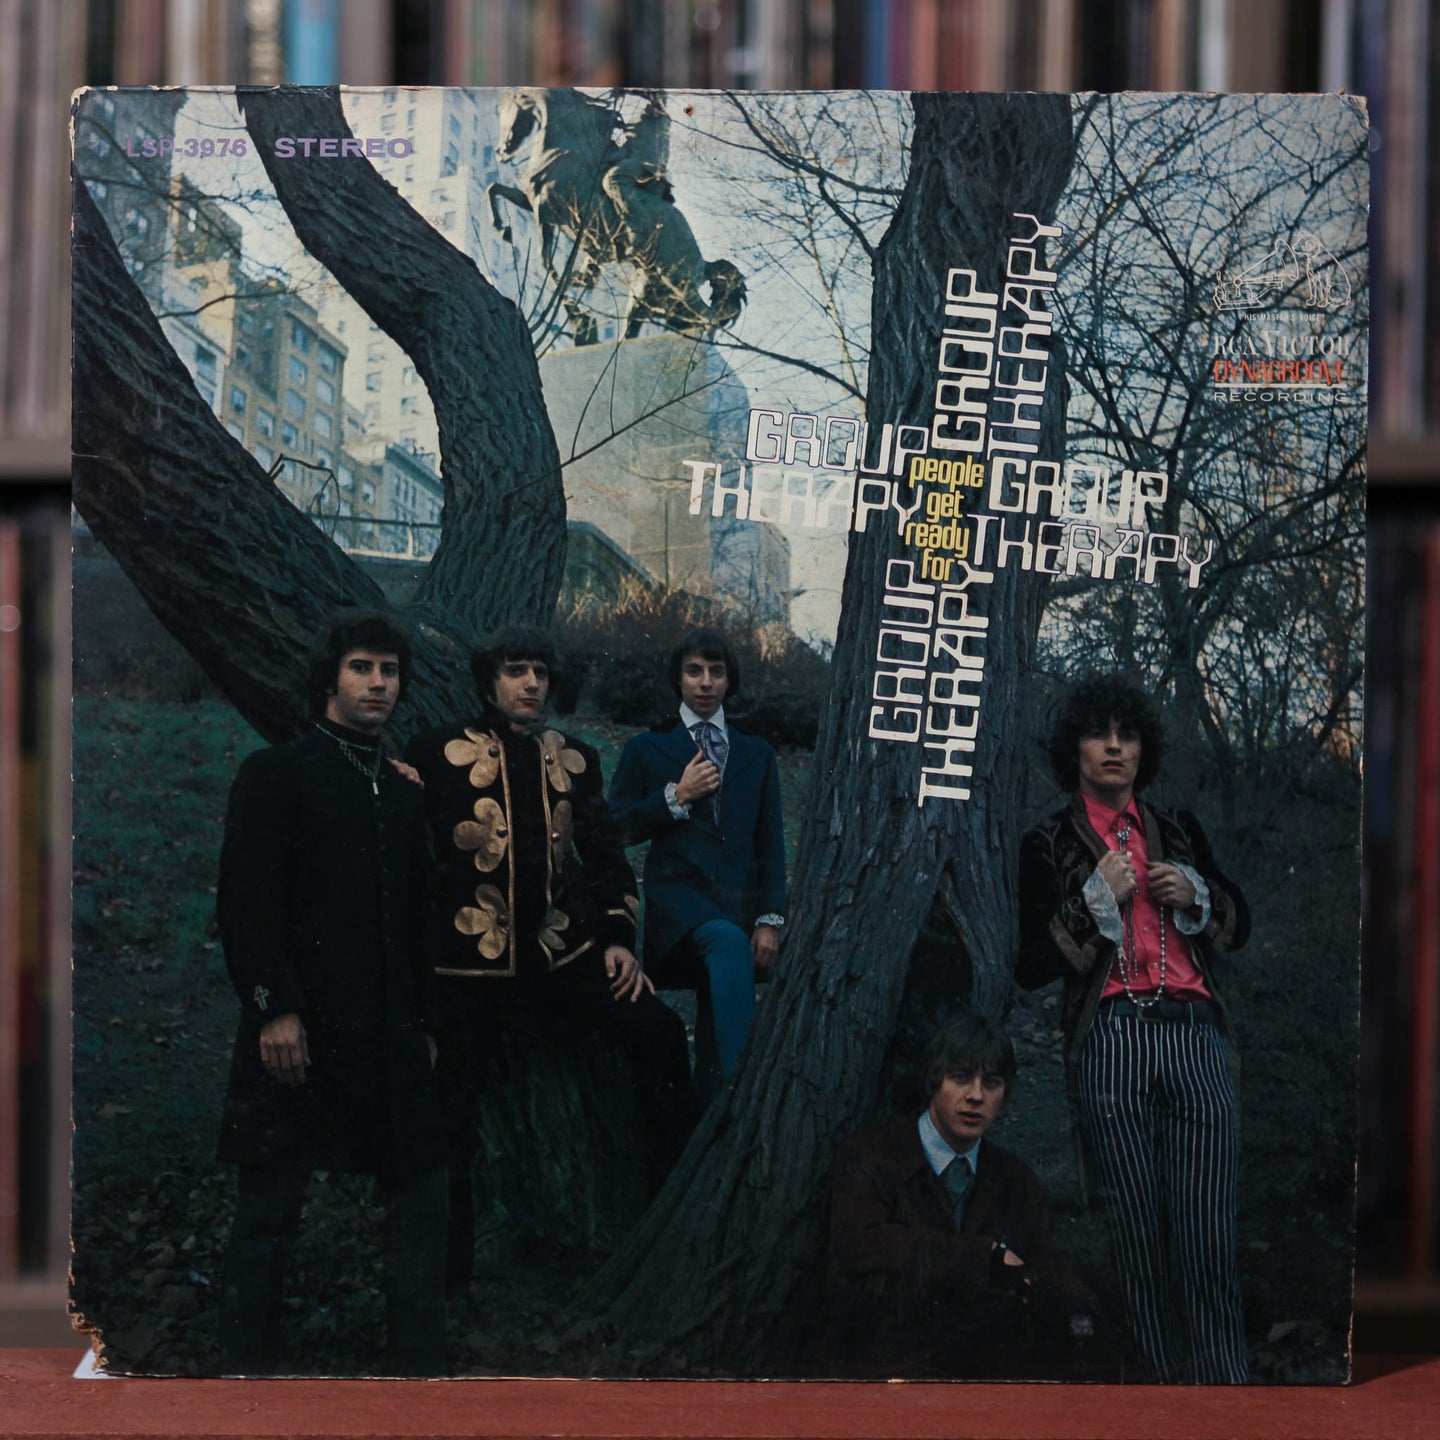 Group Therapy - Get Ready for Group Therapy - 1967 RCA Victor